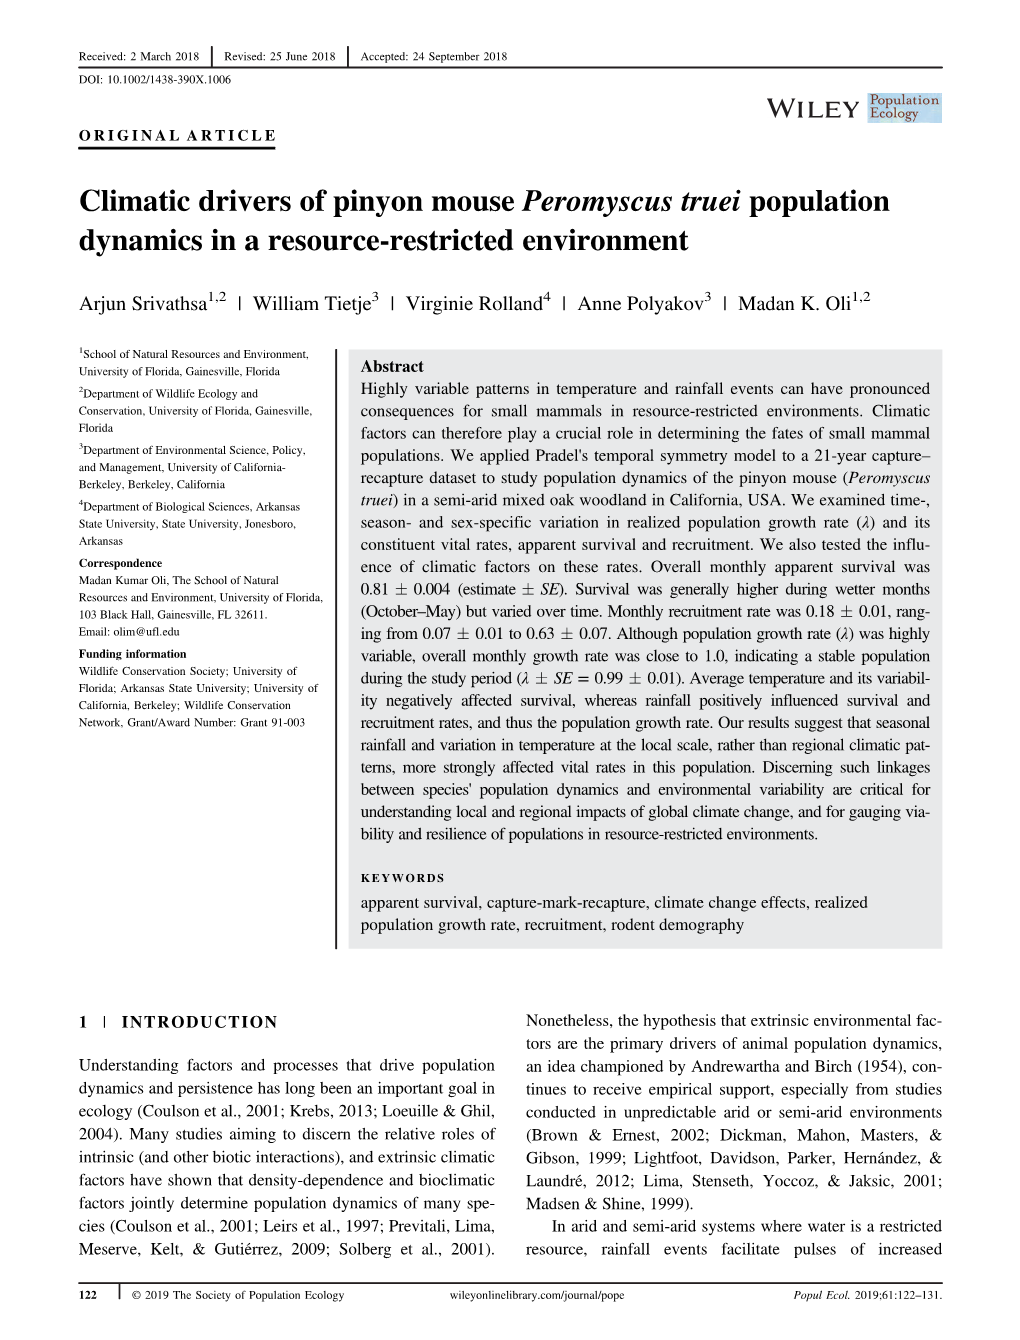 Climatic Drivers of Pinyon Mouse Peromyscus Truei Population Dynamics in a Resource-Restricted Environment